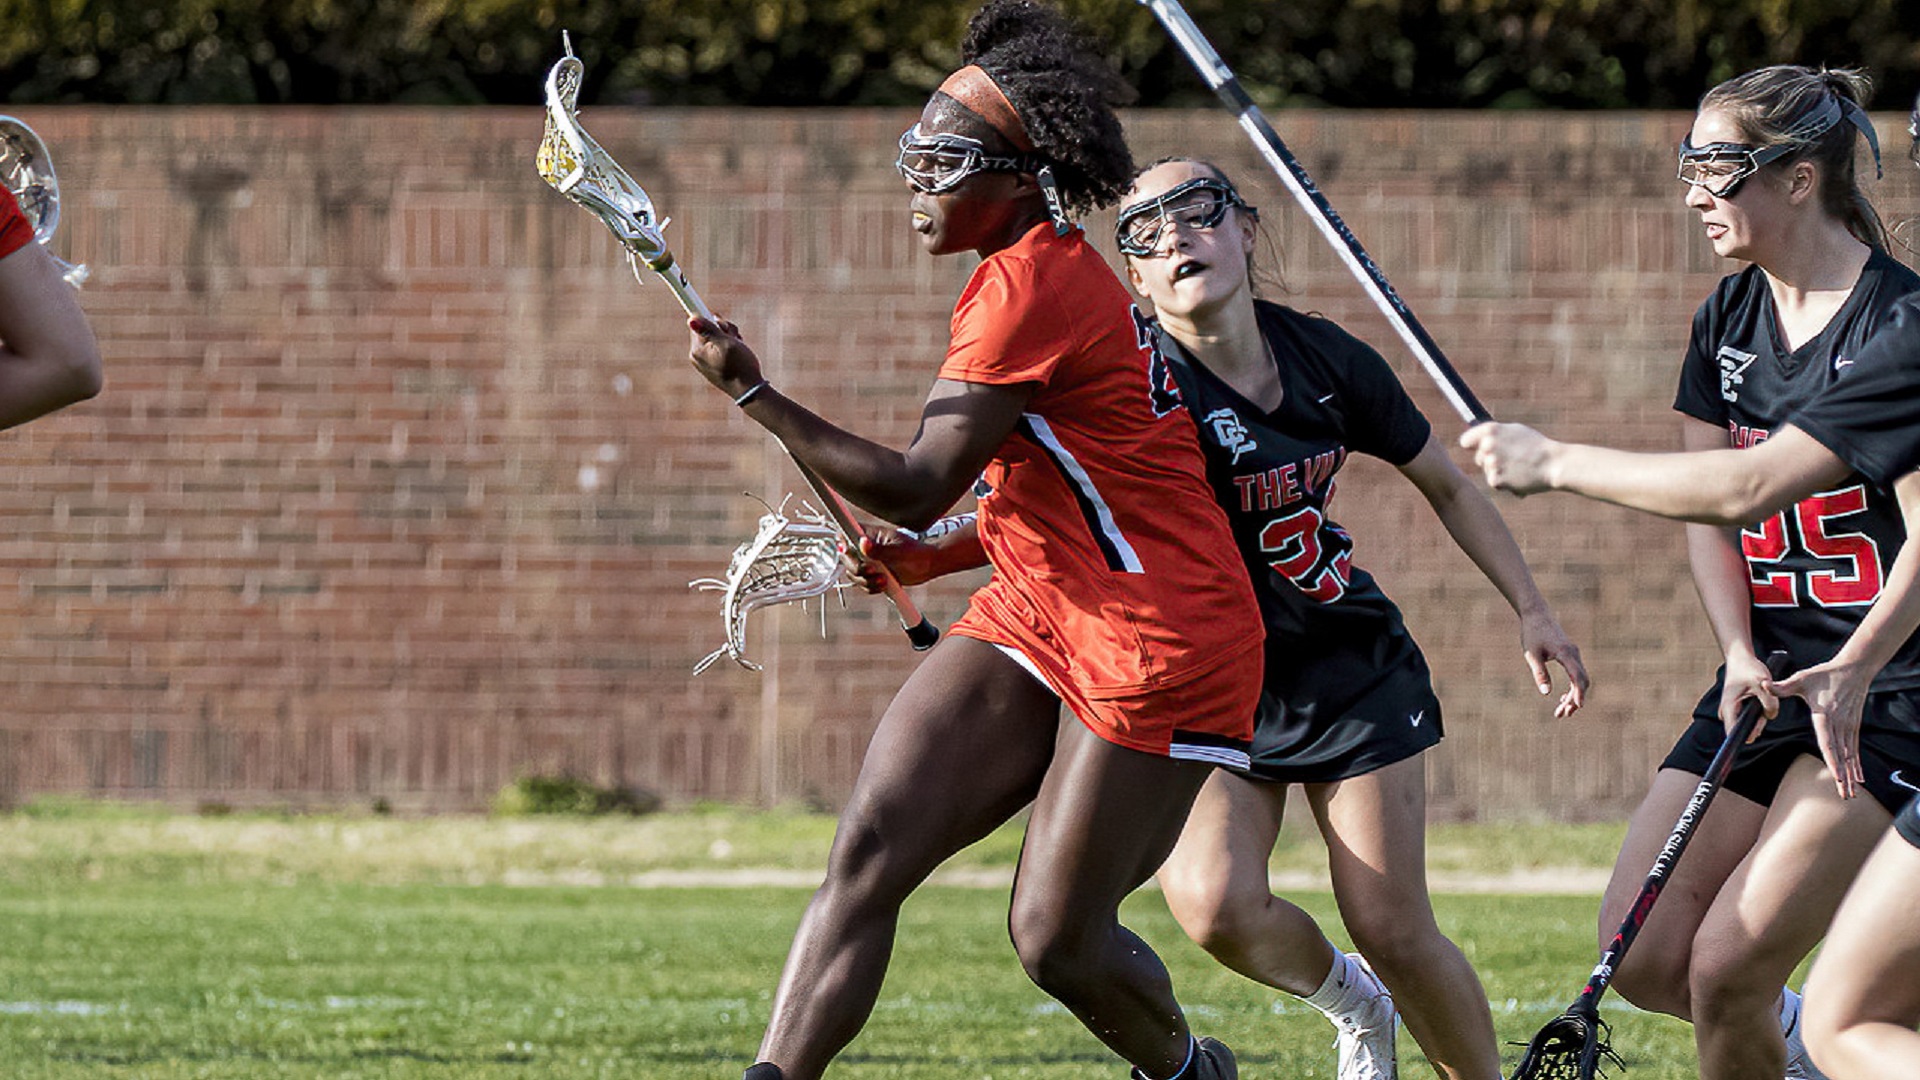 Kamryn McNeil scored three goals in the victory over North Greenville (photo by Chuck Williams)